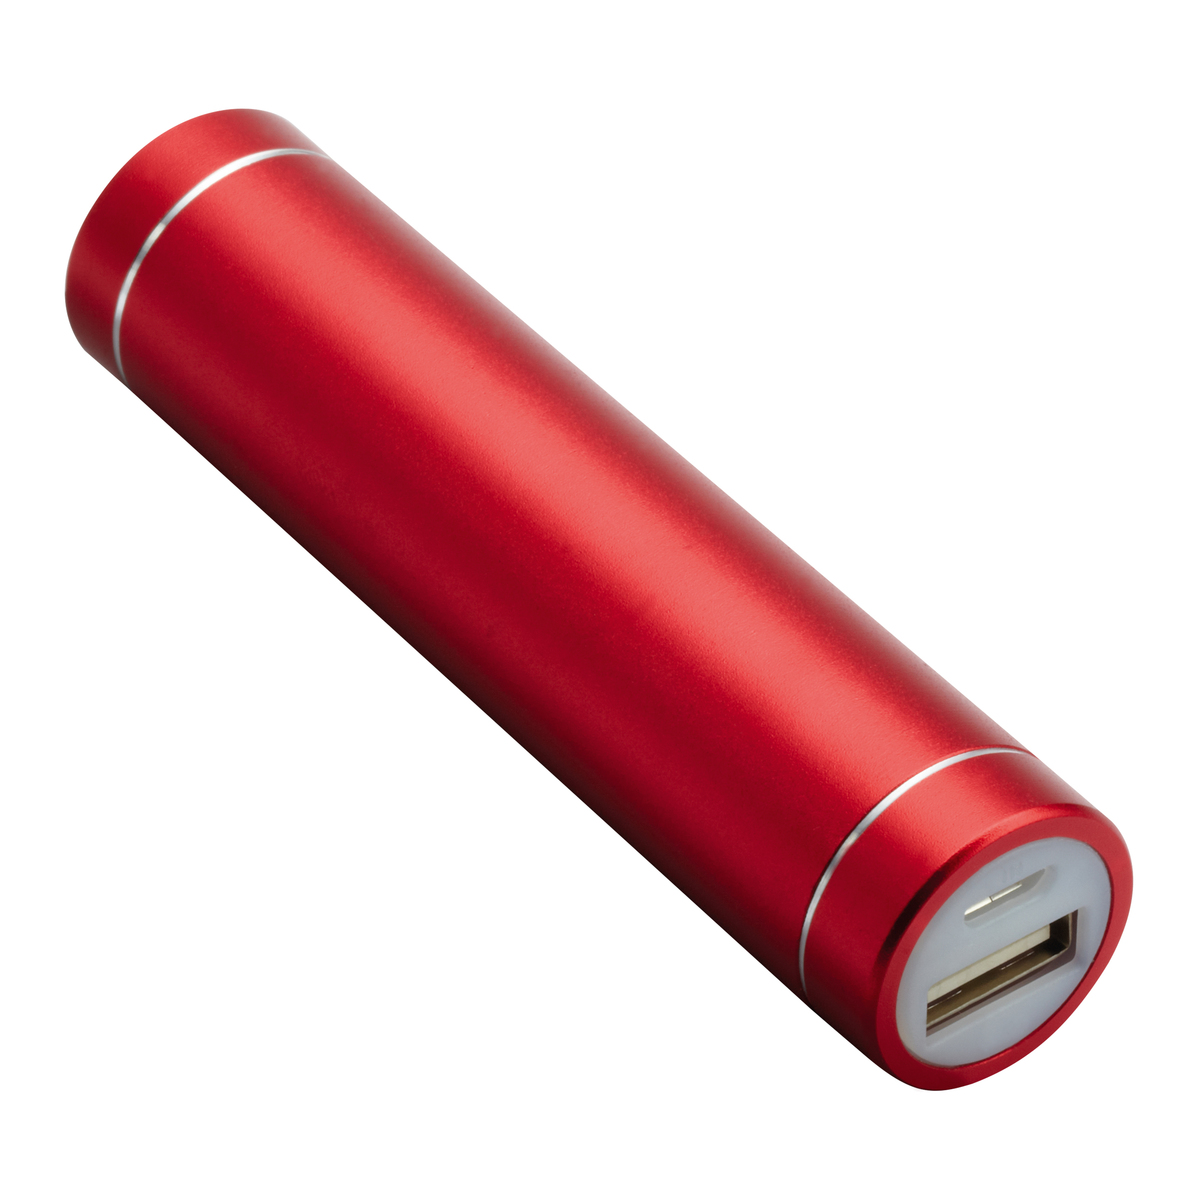 LM Powerbank REFLECTS-DELPHI RED 2200 mAh rot